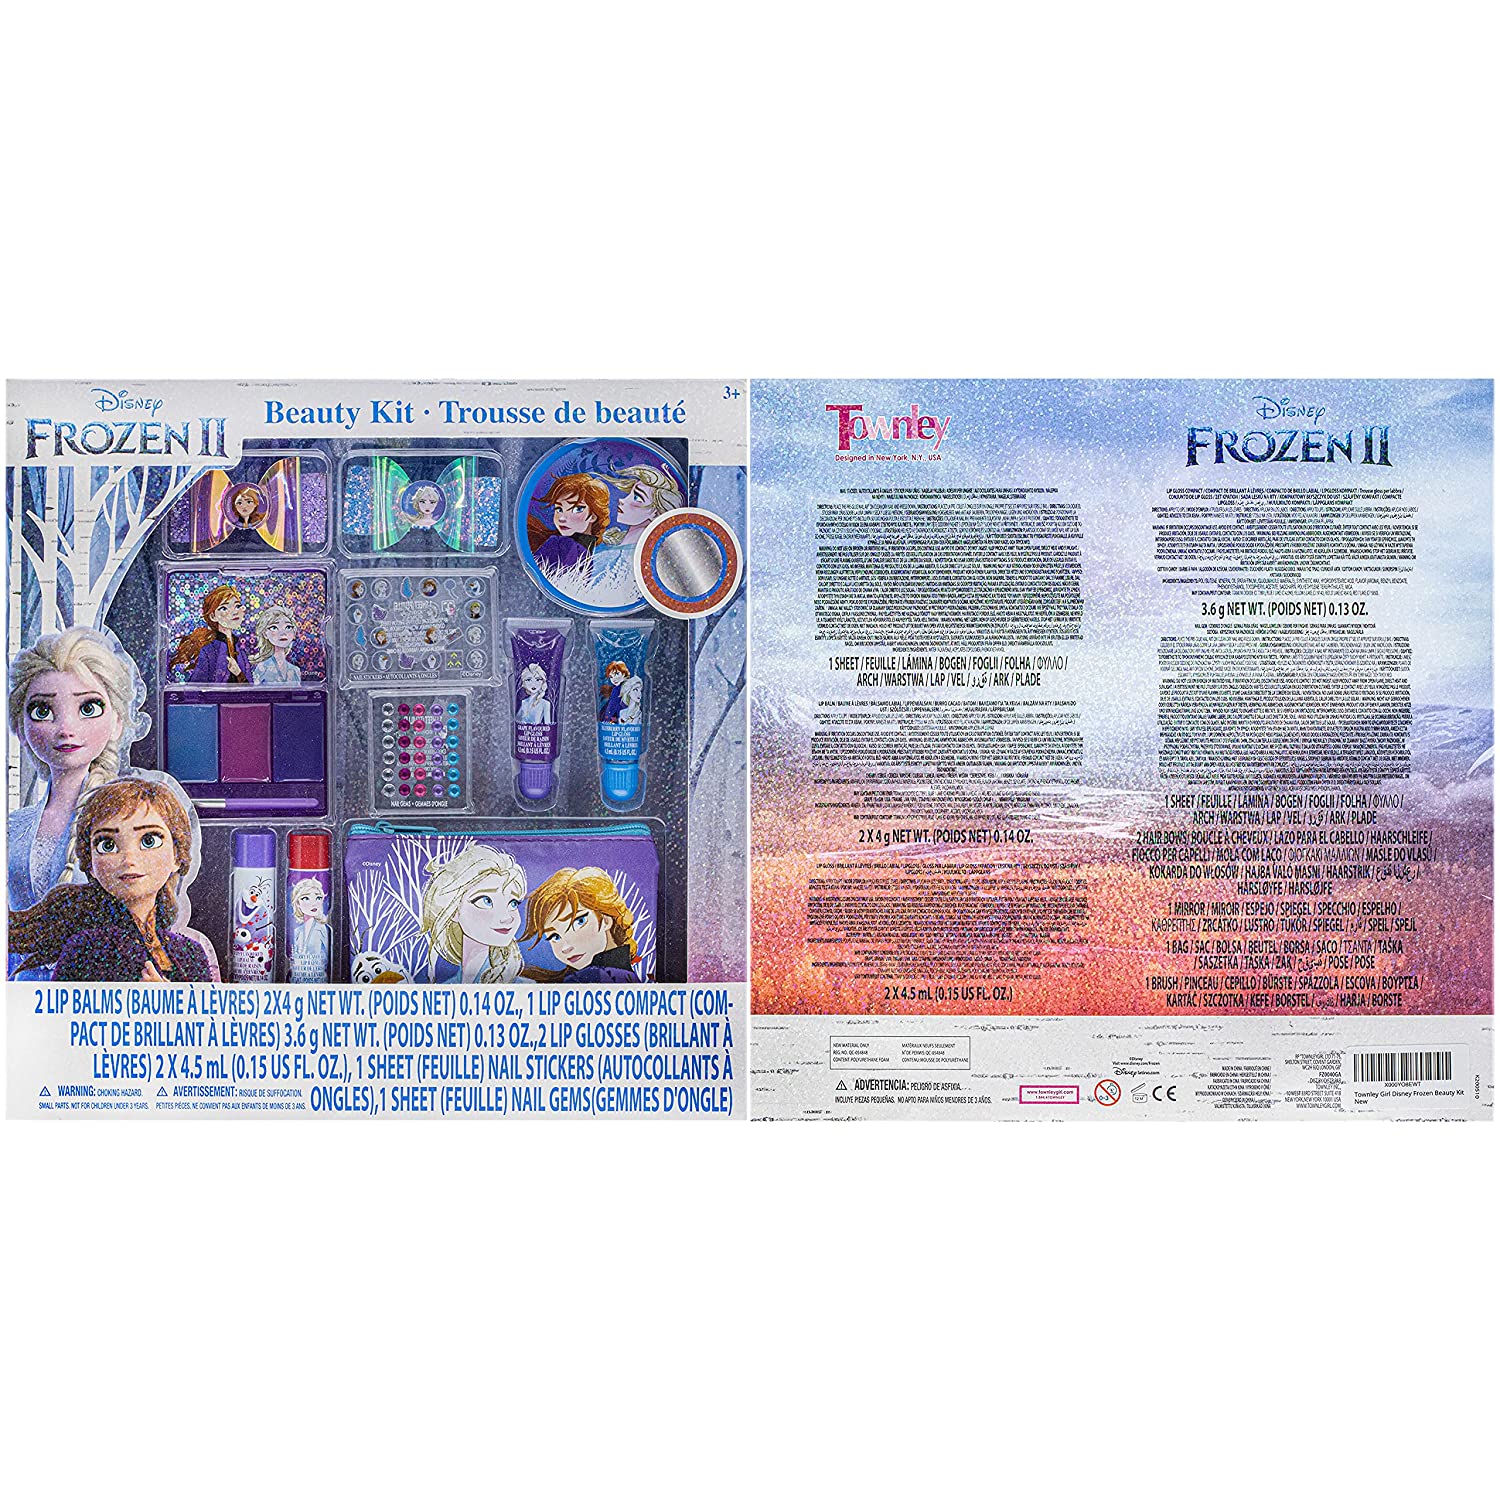 Disney Frozen 2 - Townley Girl Super Sparkly Cosmetic Beauty Makeup Set For Girls with Clips, Press On Nail, Lip Gloss, Nail Stickers, Lip Balm, Nail Gems and Mirror For Parties, Sleepovers & Makeovers